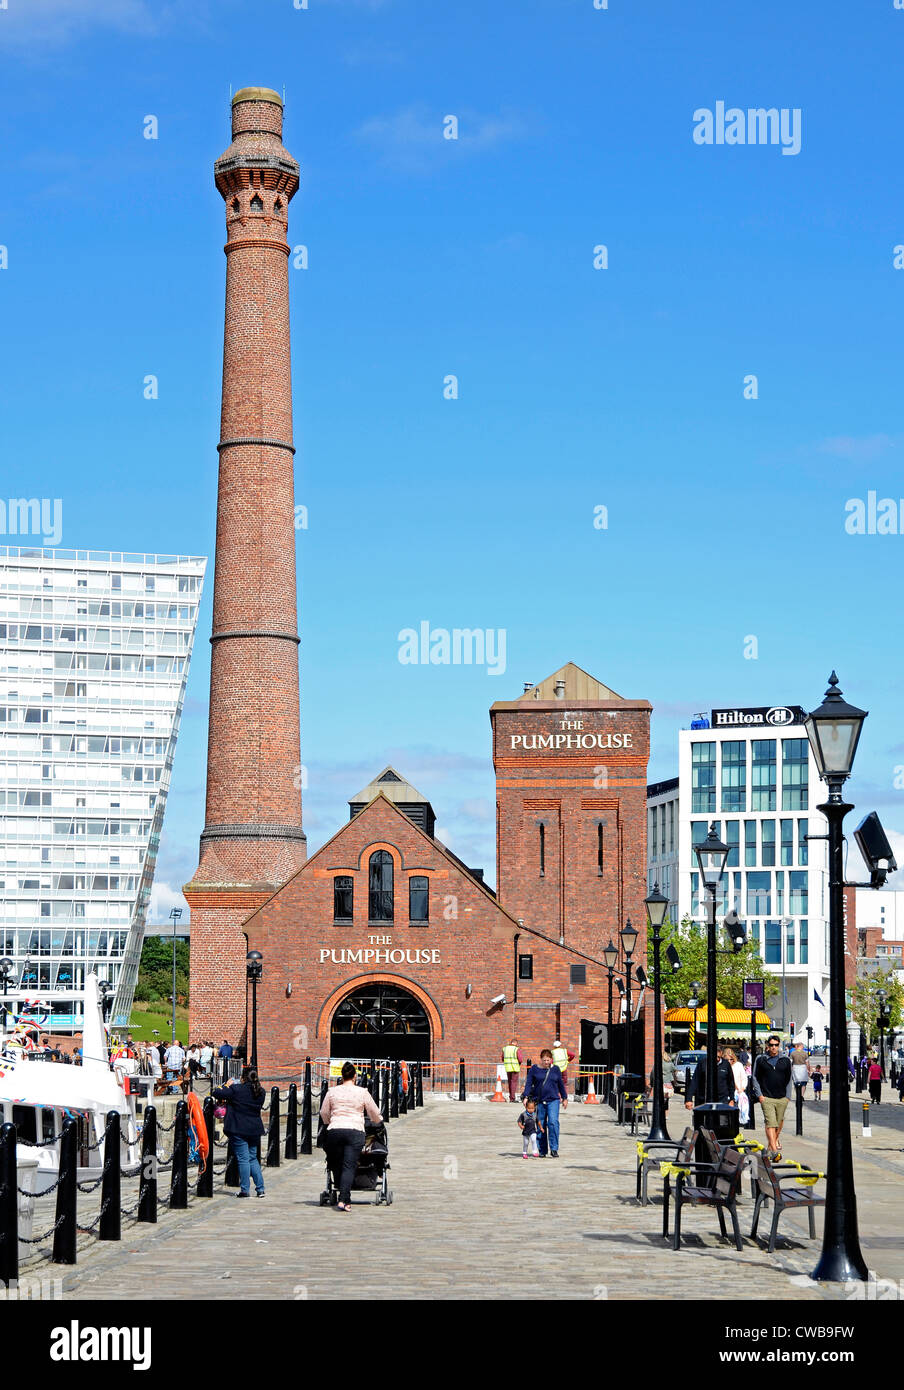 The old Pumphouse at the Albert Dock in Liverpool, UK has been restored and is now a Pub and restaurant Stock Photo